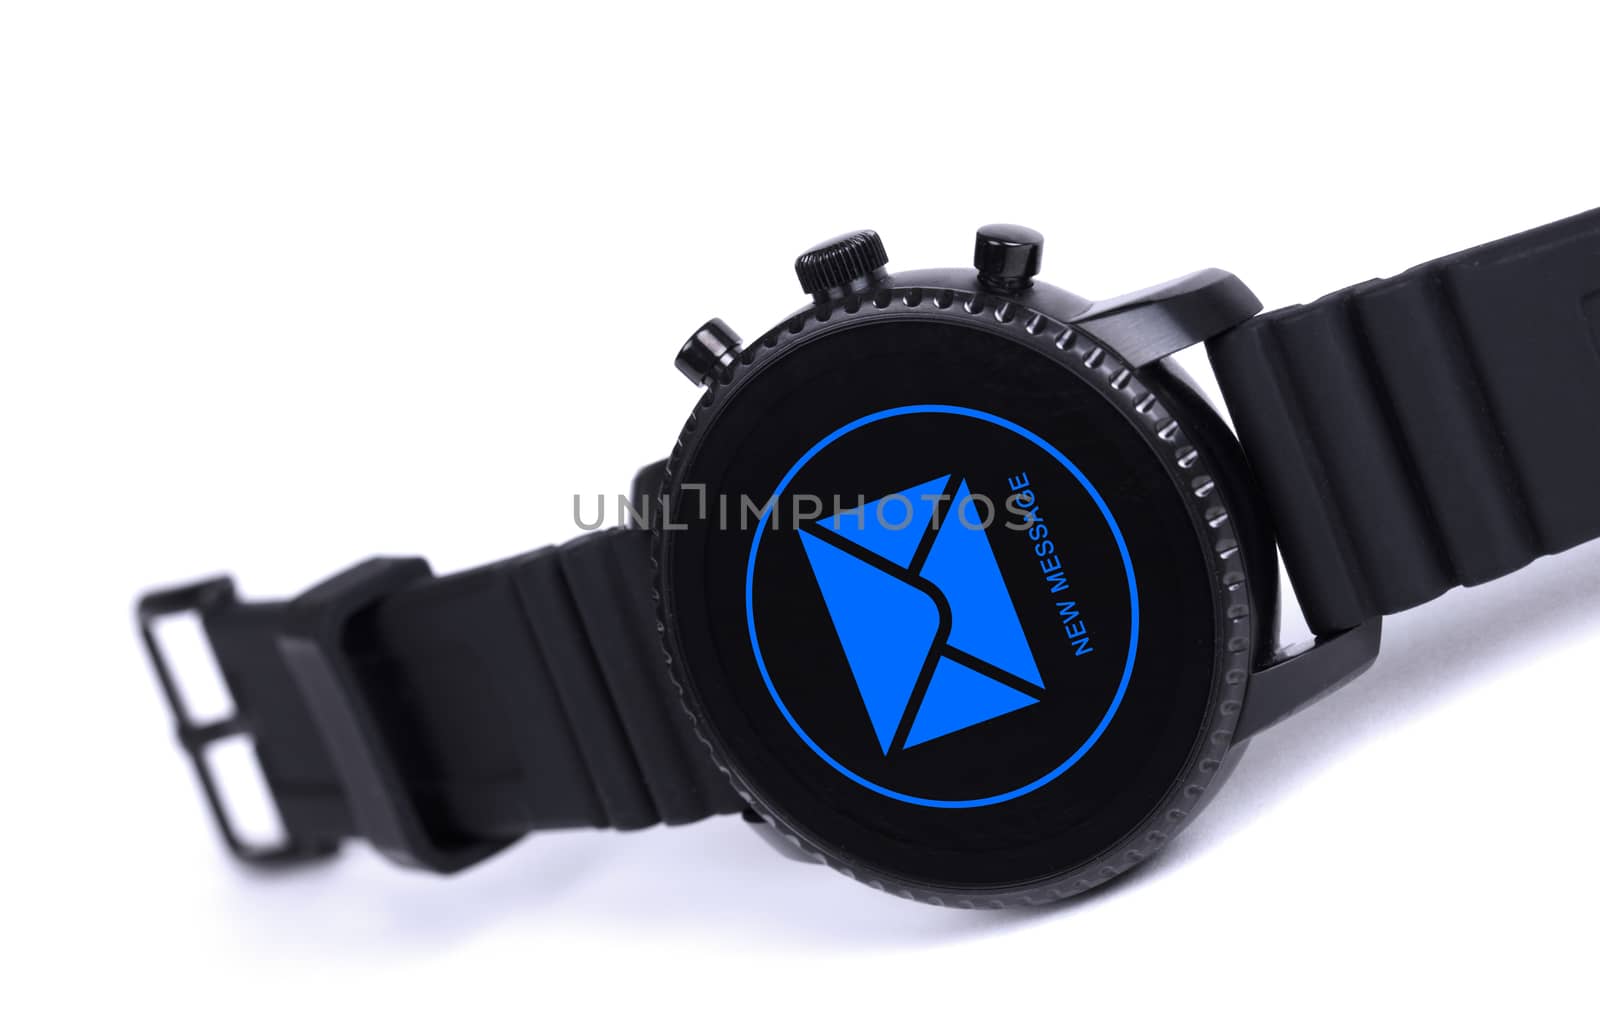 Black smartwatch isolated on a white background, new message